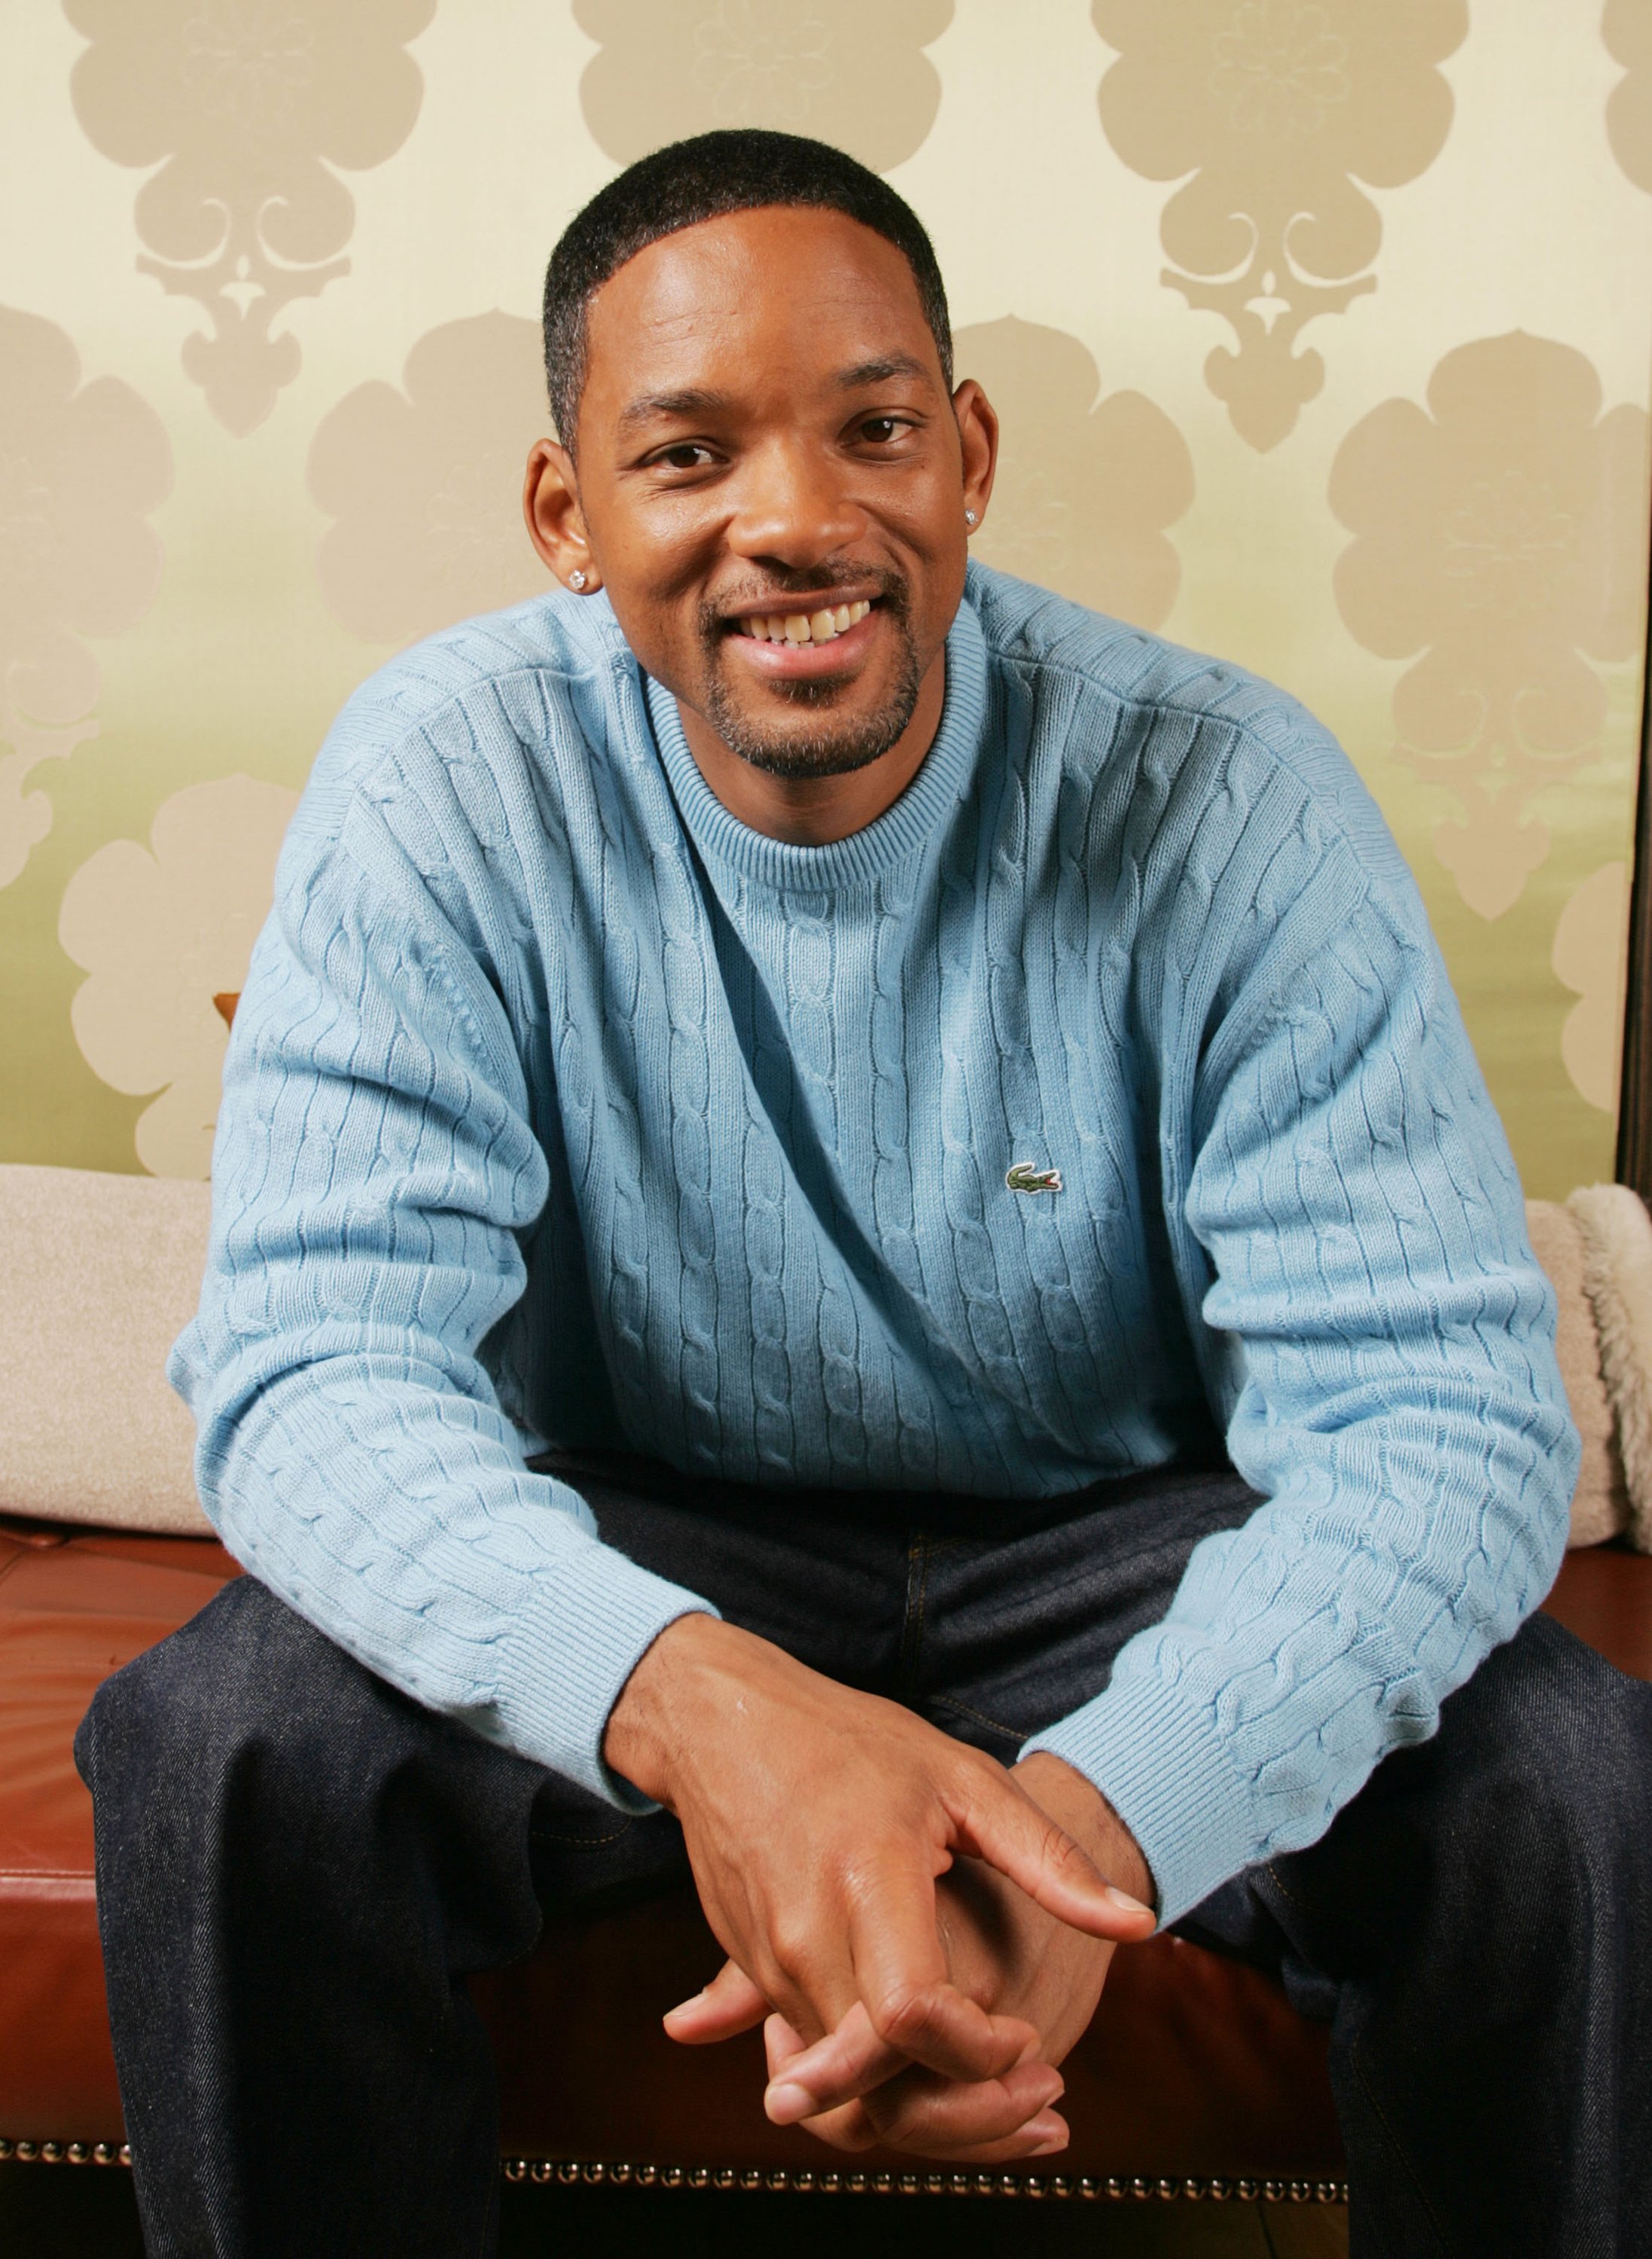 Will Smith during a press event for his film, "Hitch" in February 2005. | Photo: Getty Images